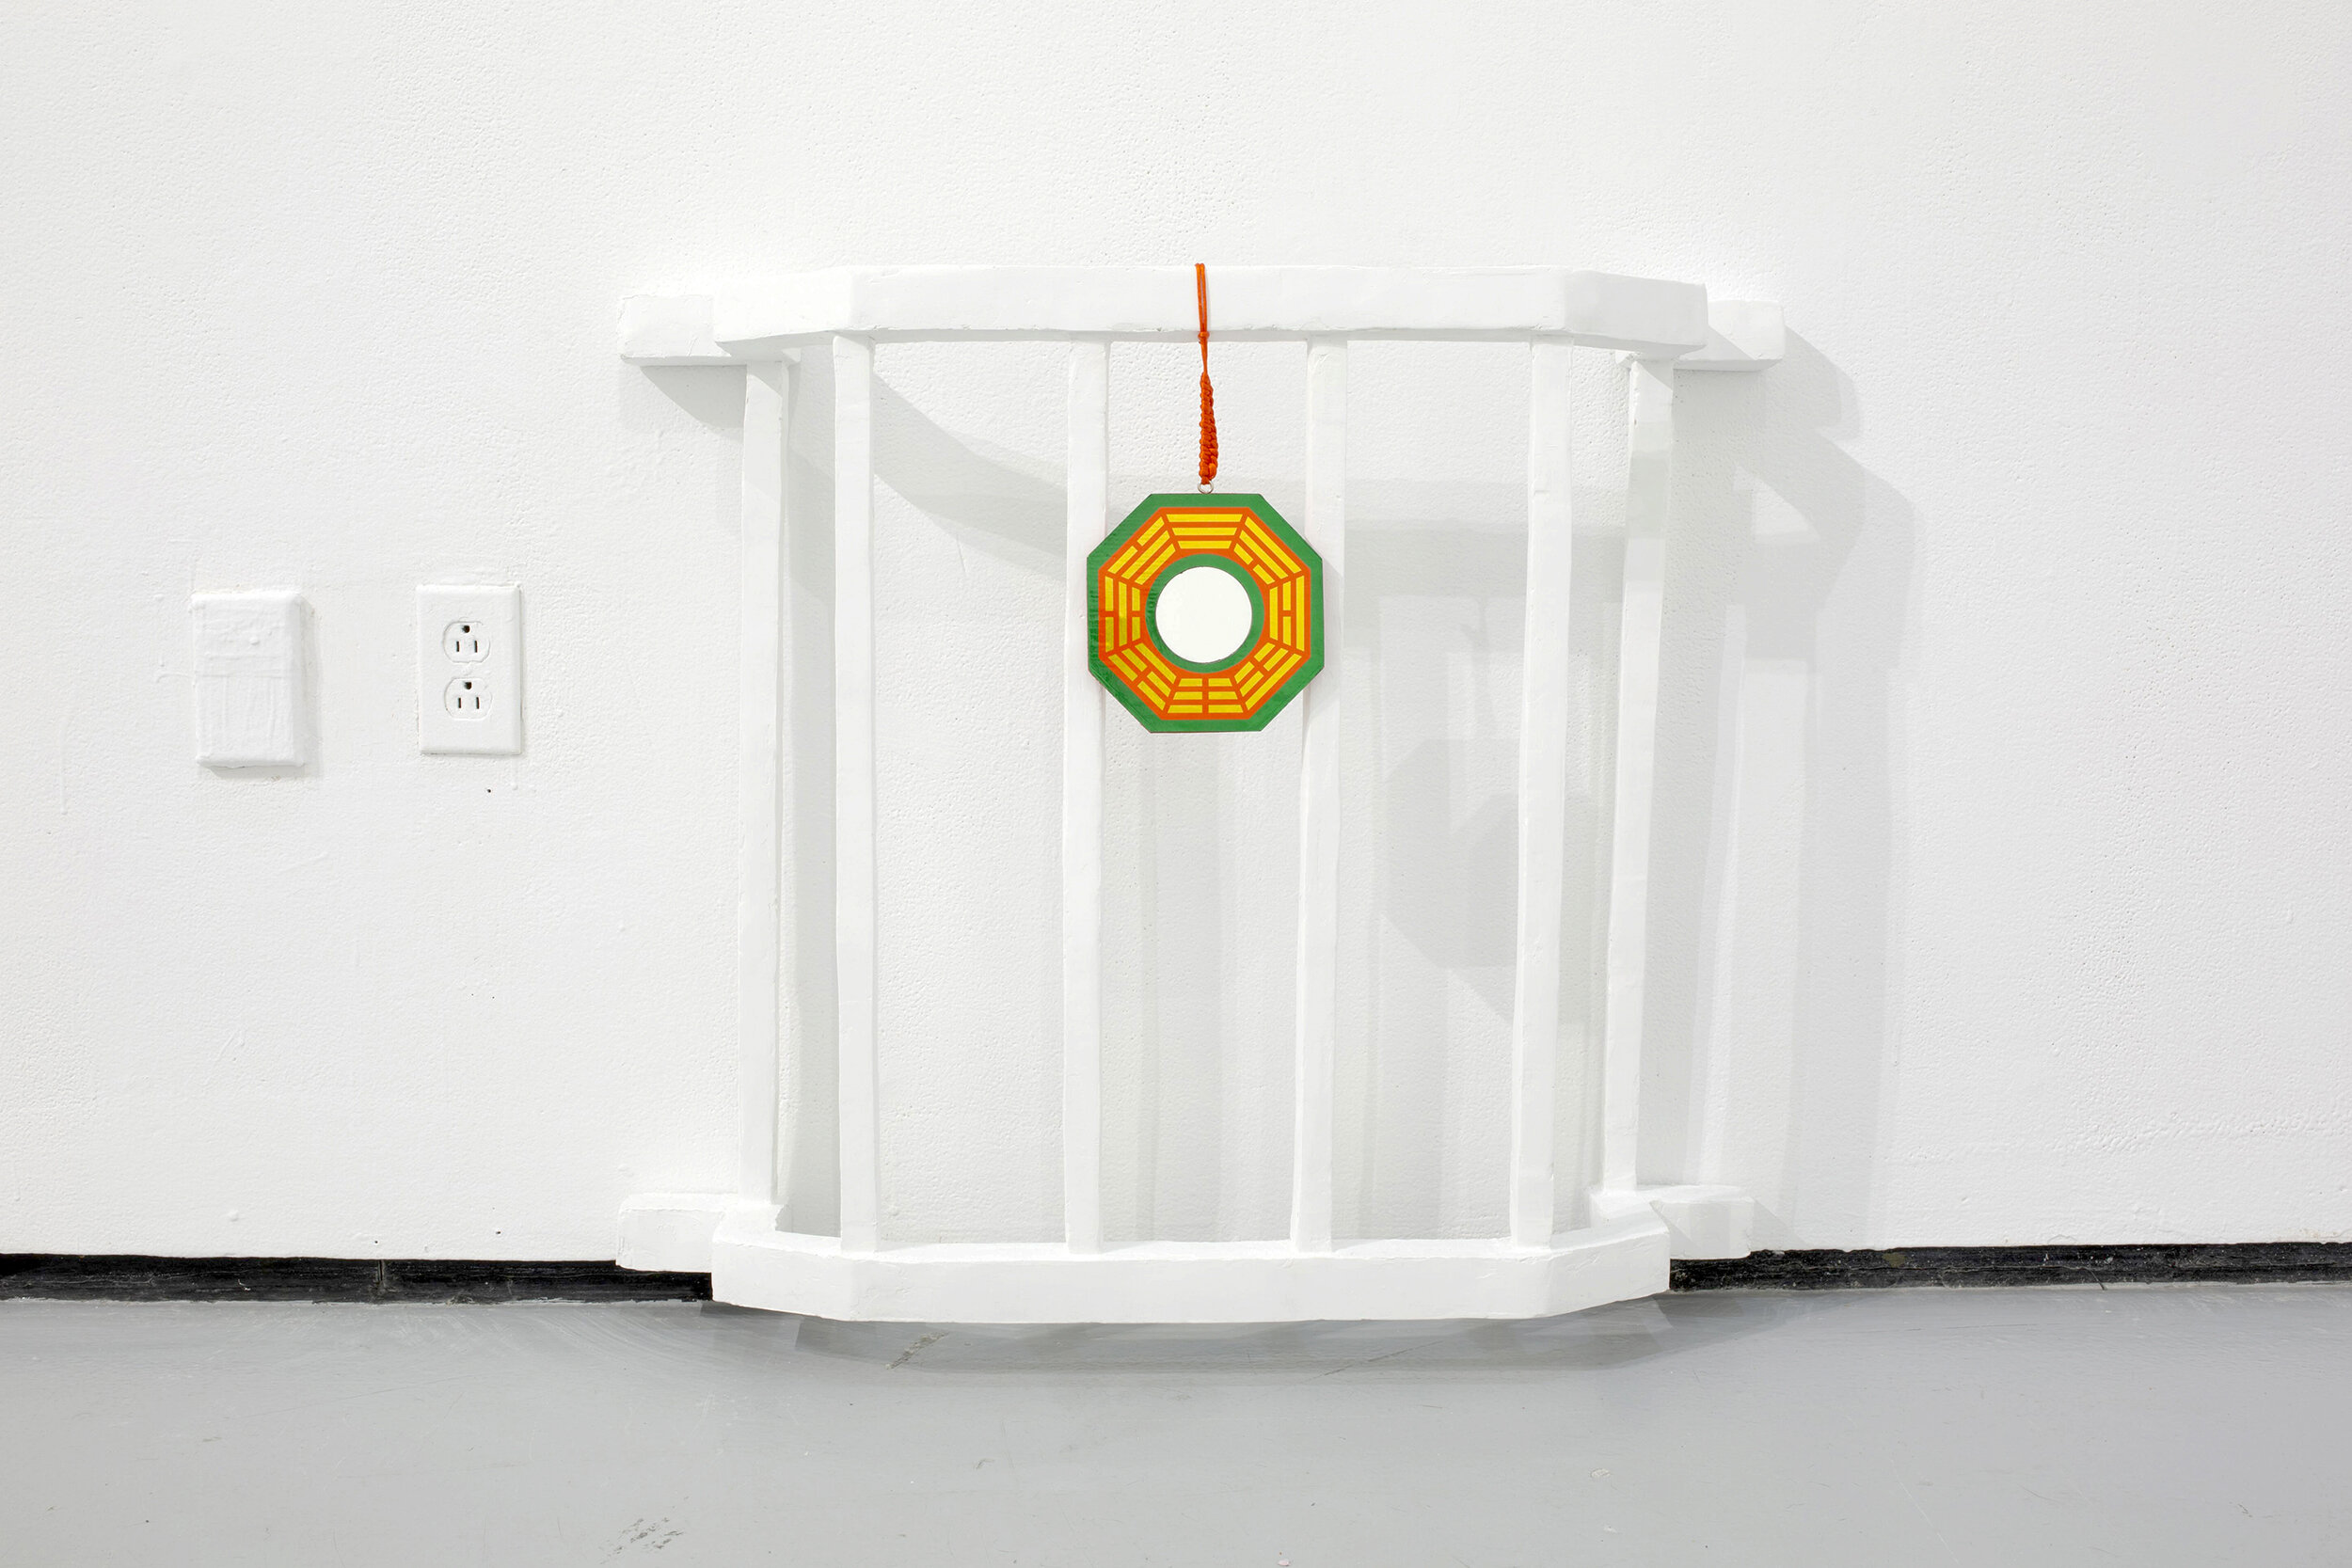  Anne Wu  Once Forgotten, Twice Remembered (We Were Zero, and then We Were Ten) , 2020 Stainless steel, polystyrene, joint compound, plaster, paint, bagua mirror, satin nylon cord 30 x 24 x 4 inches (76 x 61 x 10 cm) photo by Sol Avi Erez 